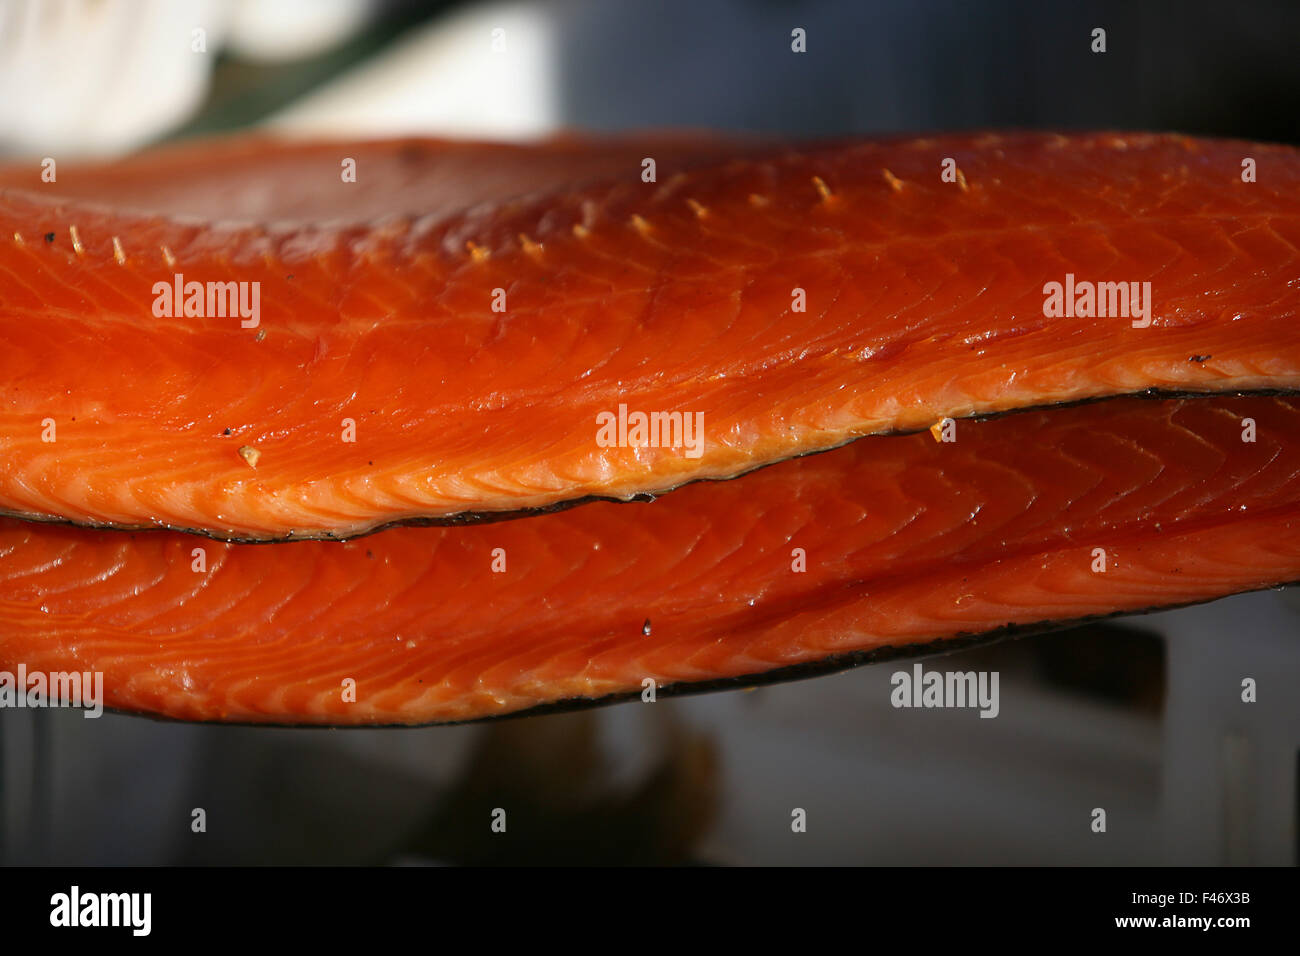 Fillet of a fish Stock Photo